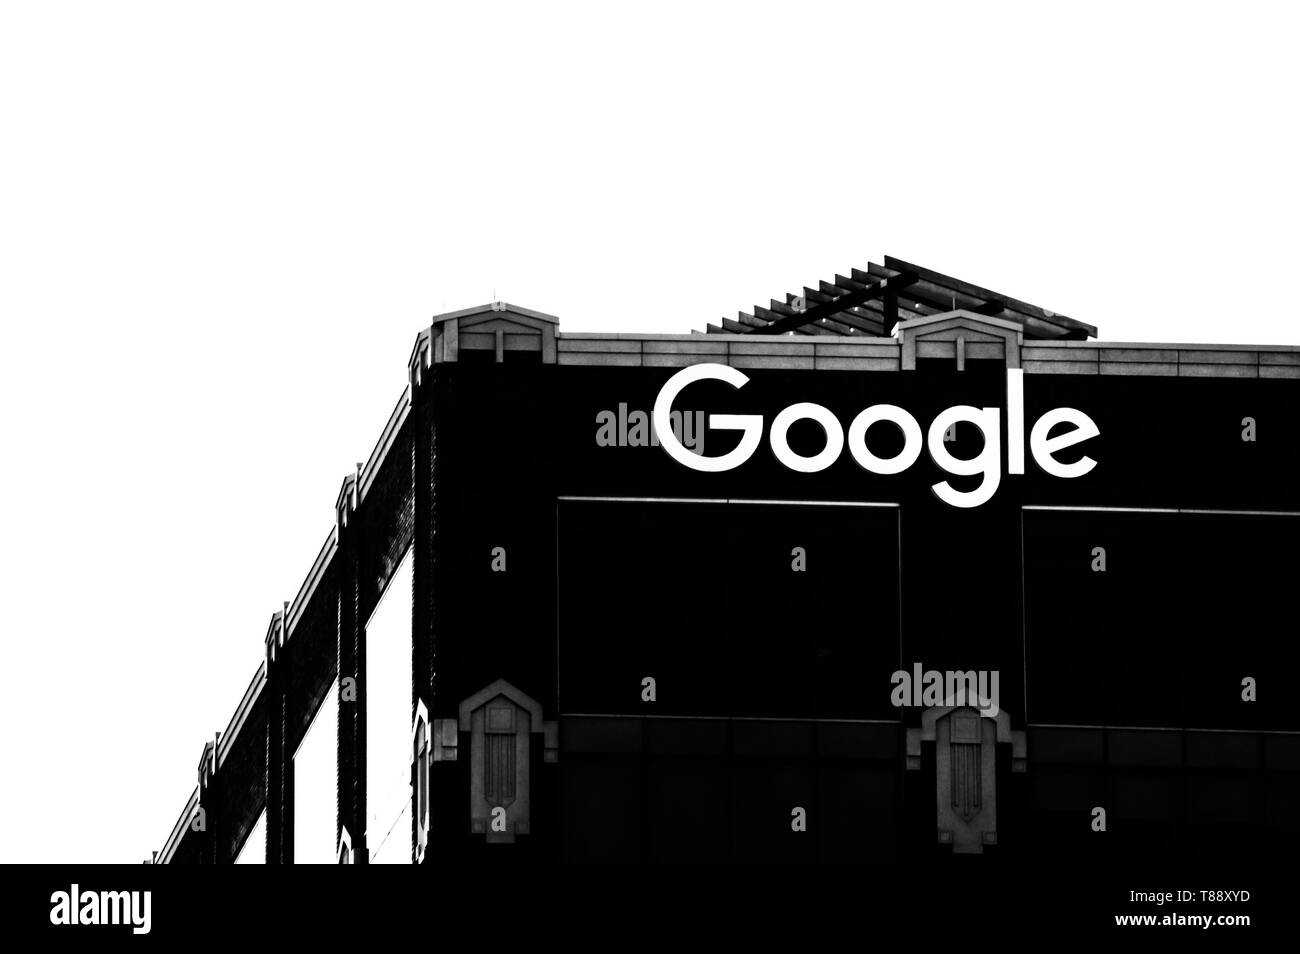 Fulton Market, Chicago-May 4, 2019: A silhouette in black and white of Google's office building near the West Loop. Streets of Chicago. Stock Photo